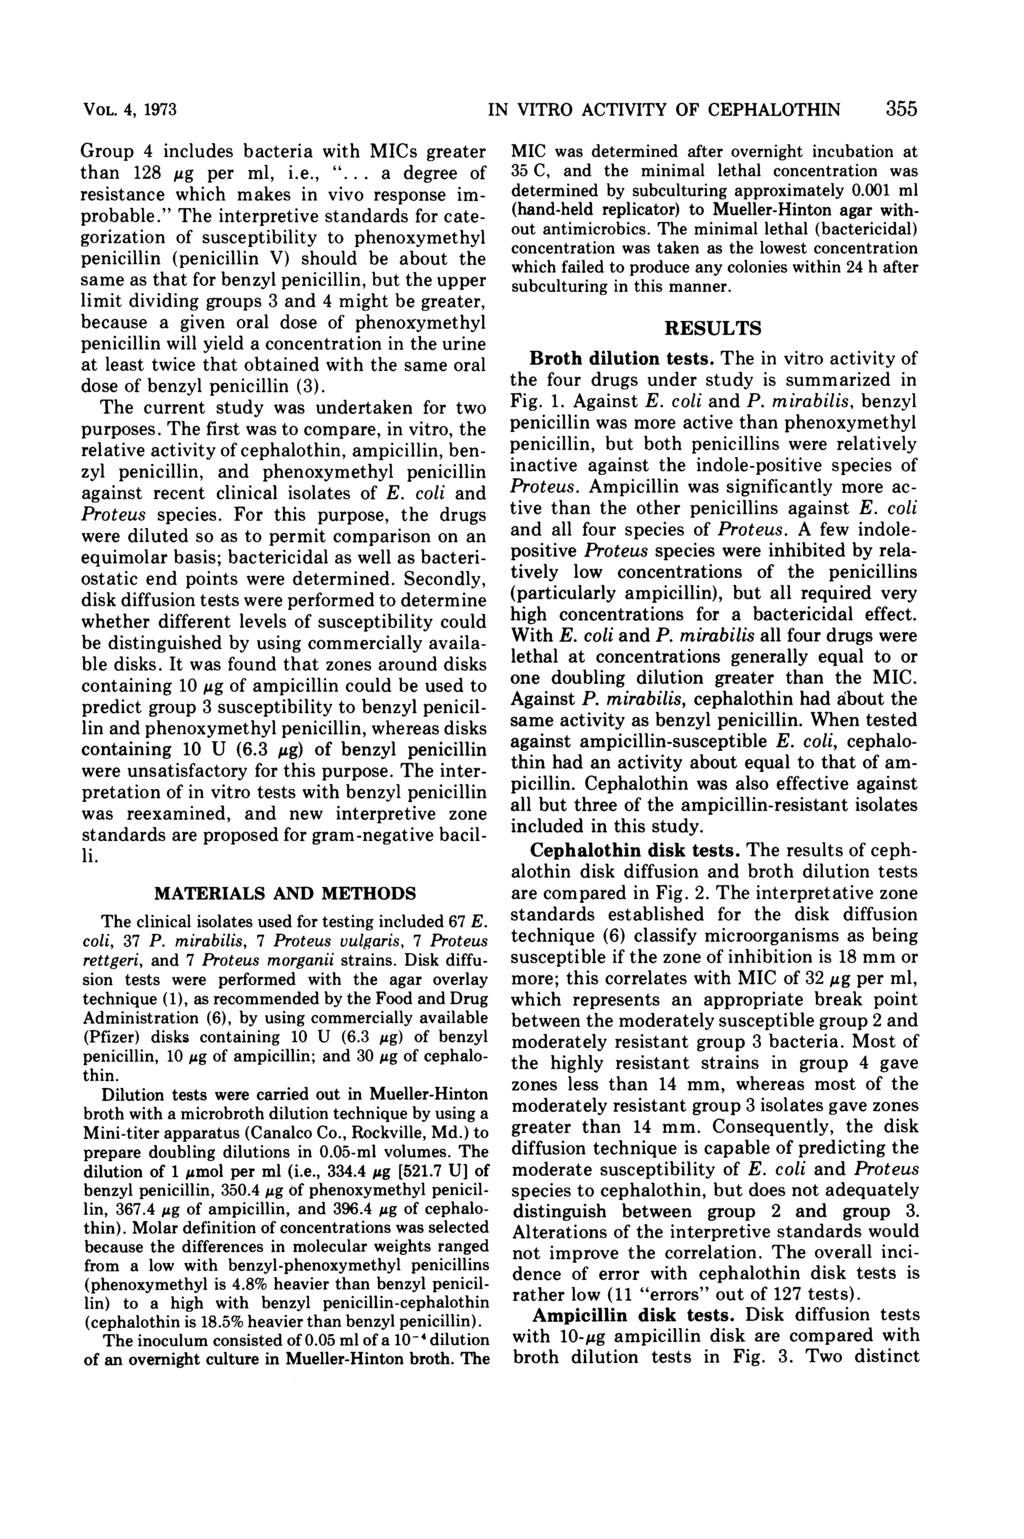 VOL. 4, 1973 Group 4 includes bacteria with MICs greater than 128 ug per ml, i.e., "... a degree of resistance which makes in vivo response improbable.